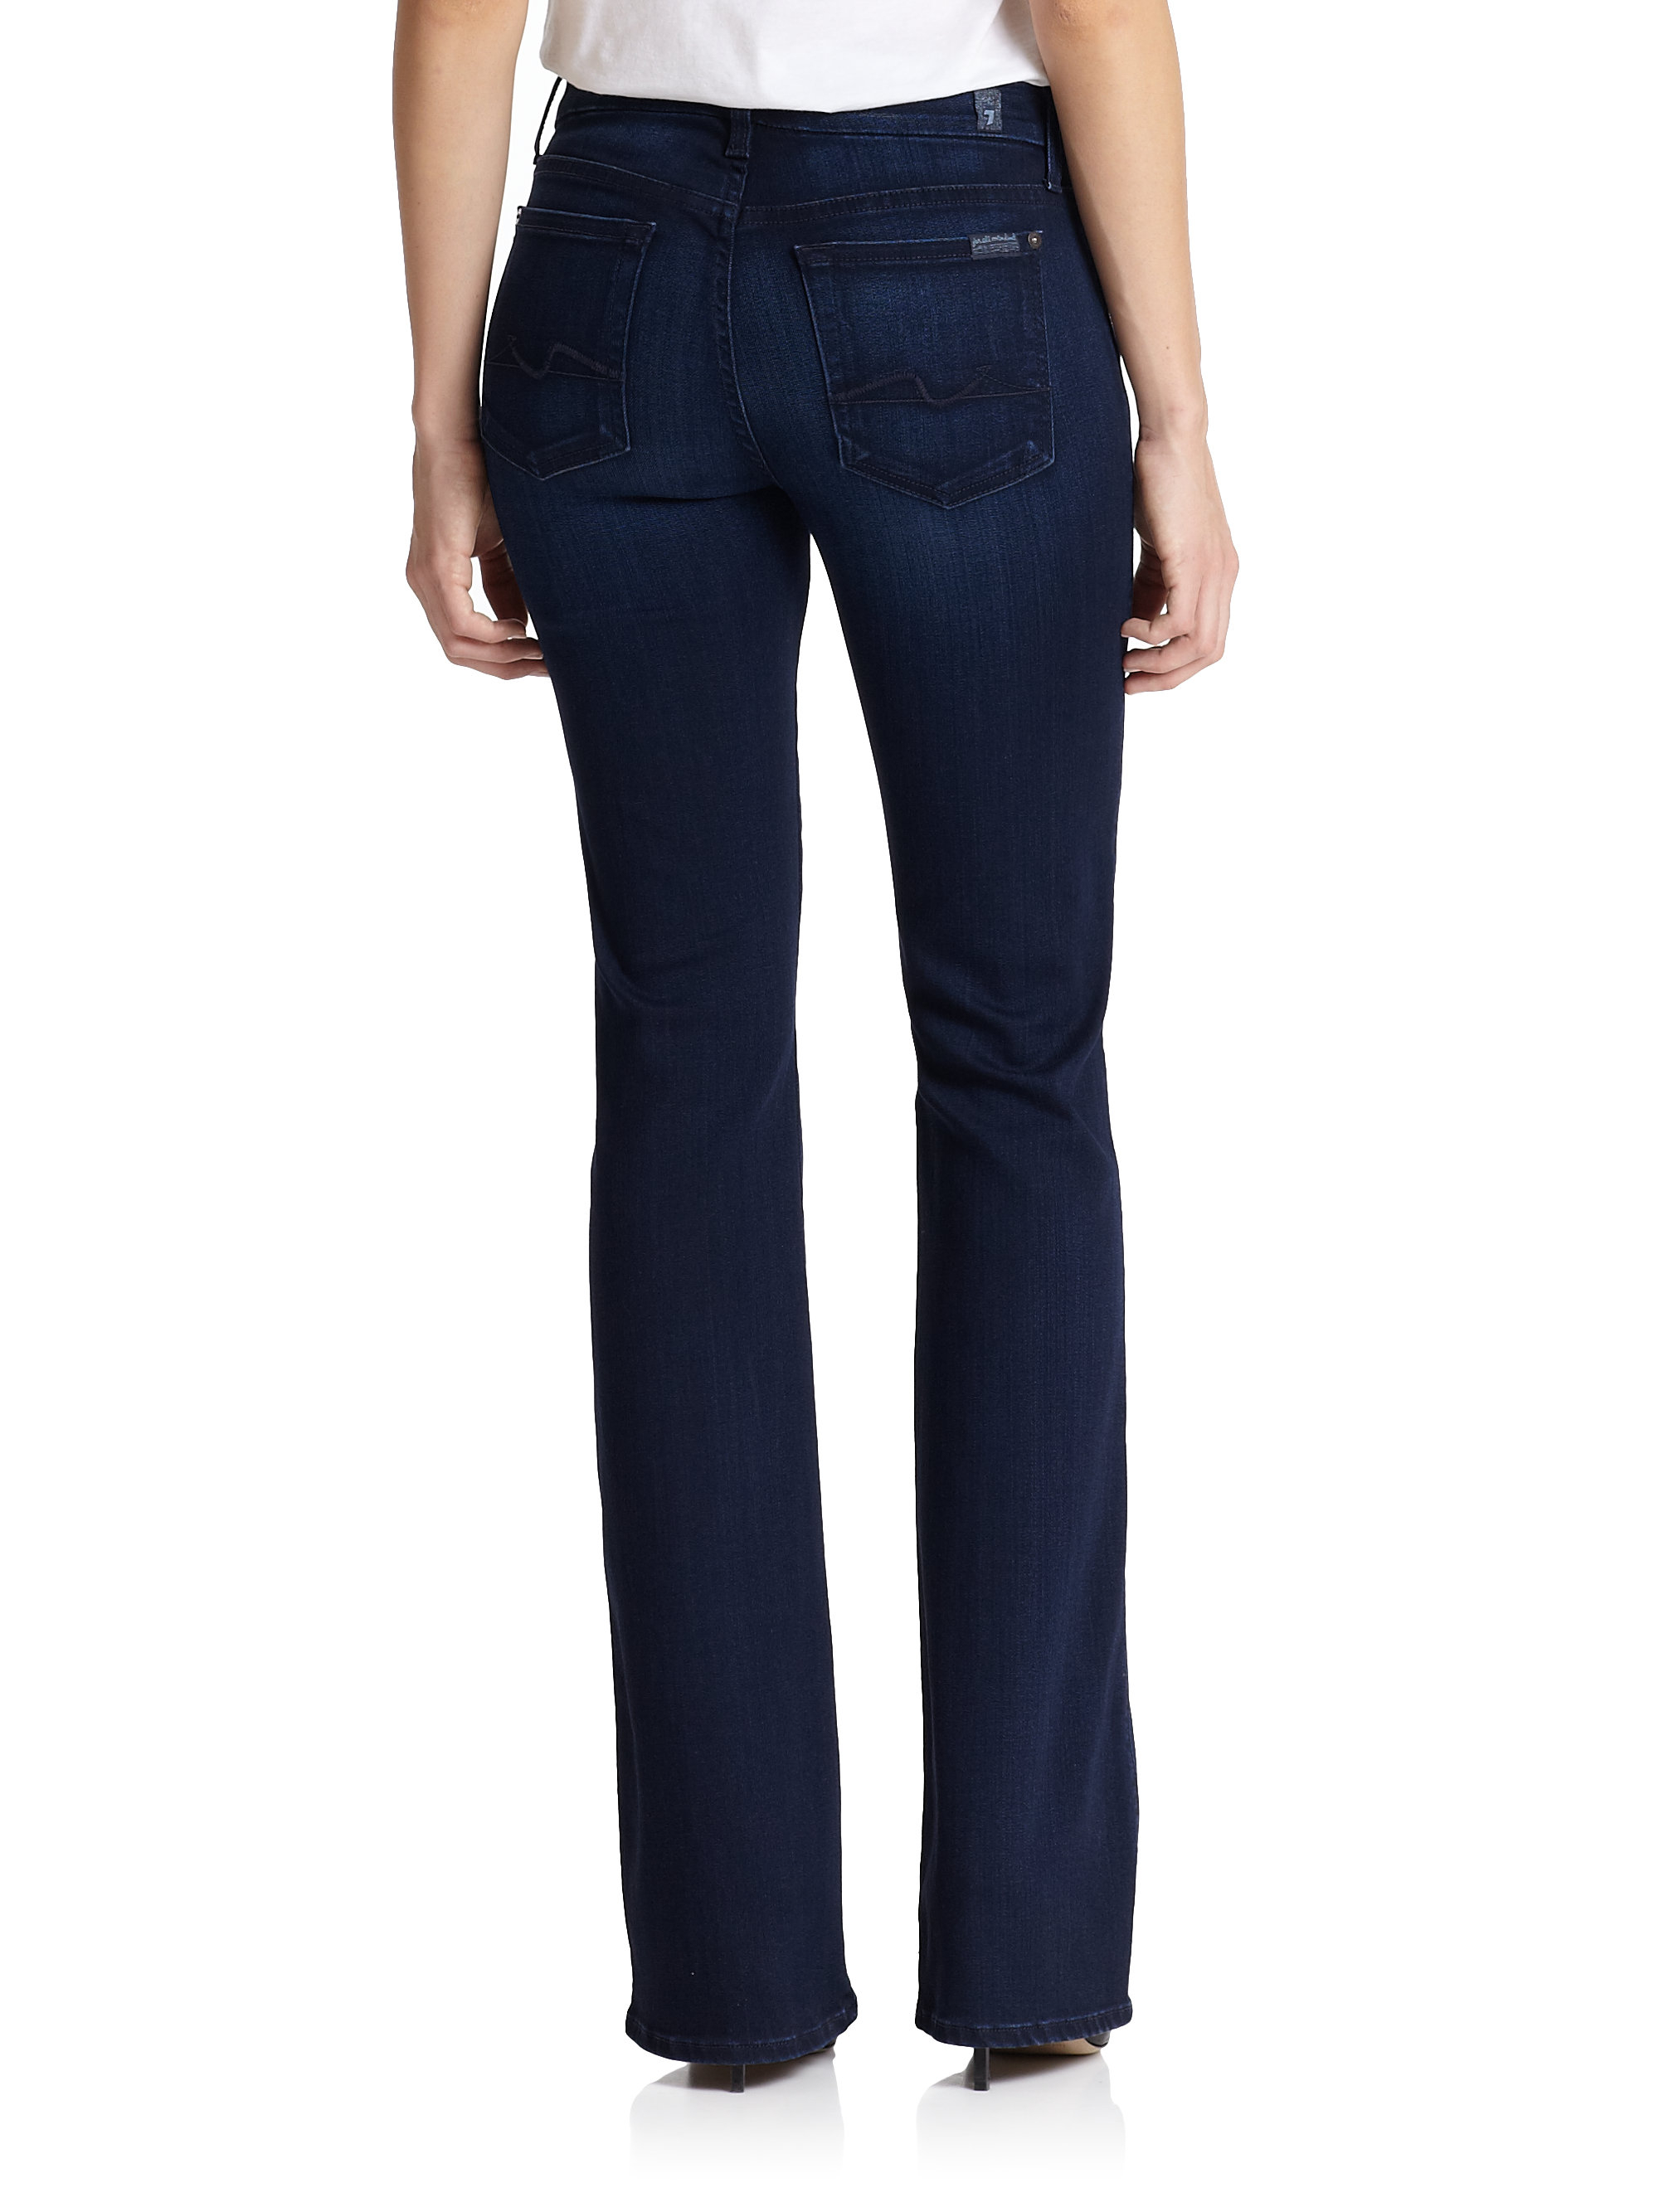 Lyst - 7 For All Mankind Kimmie Bootcut Jeans in Blue